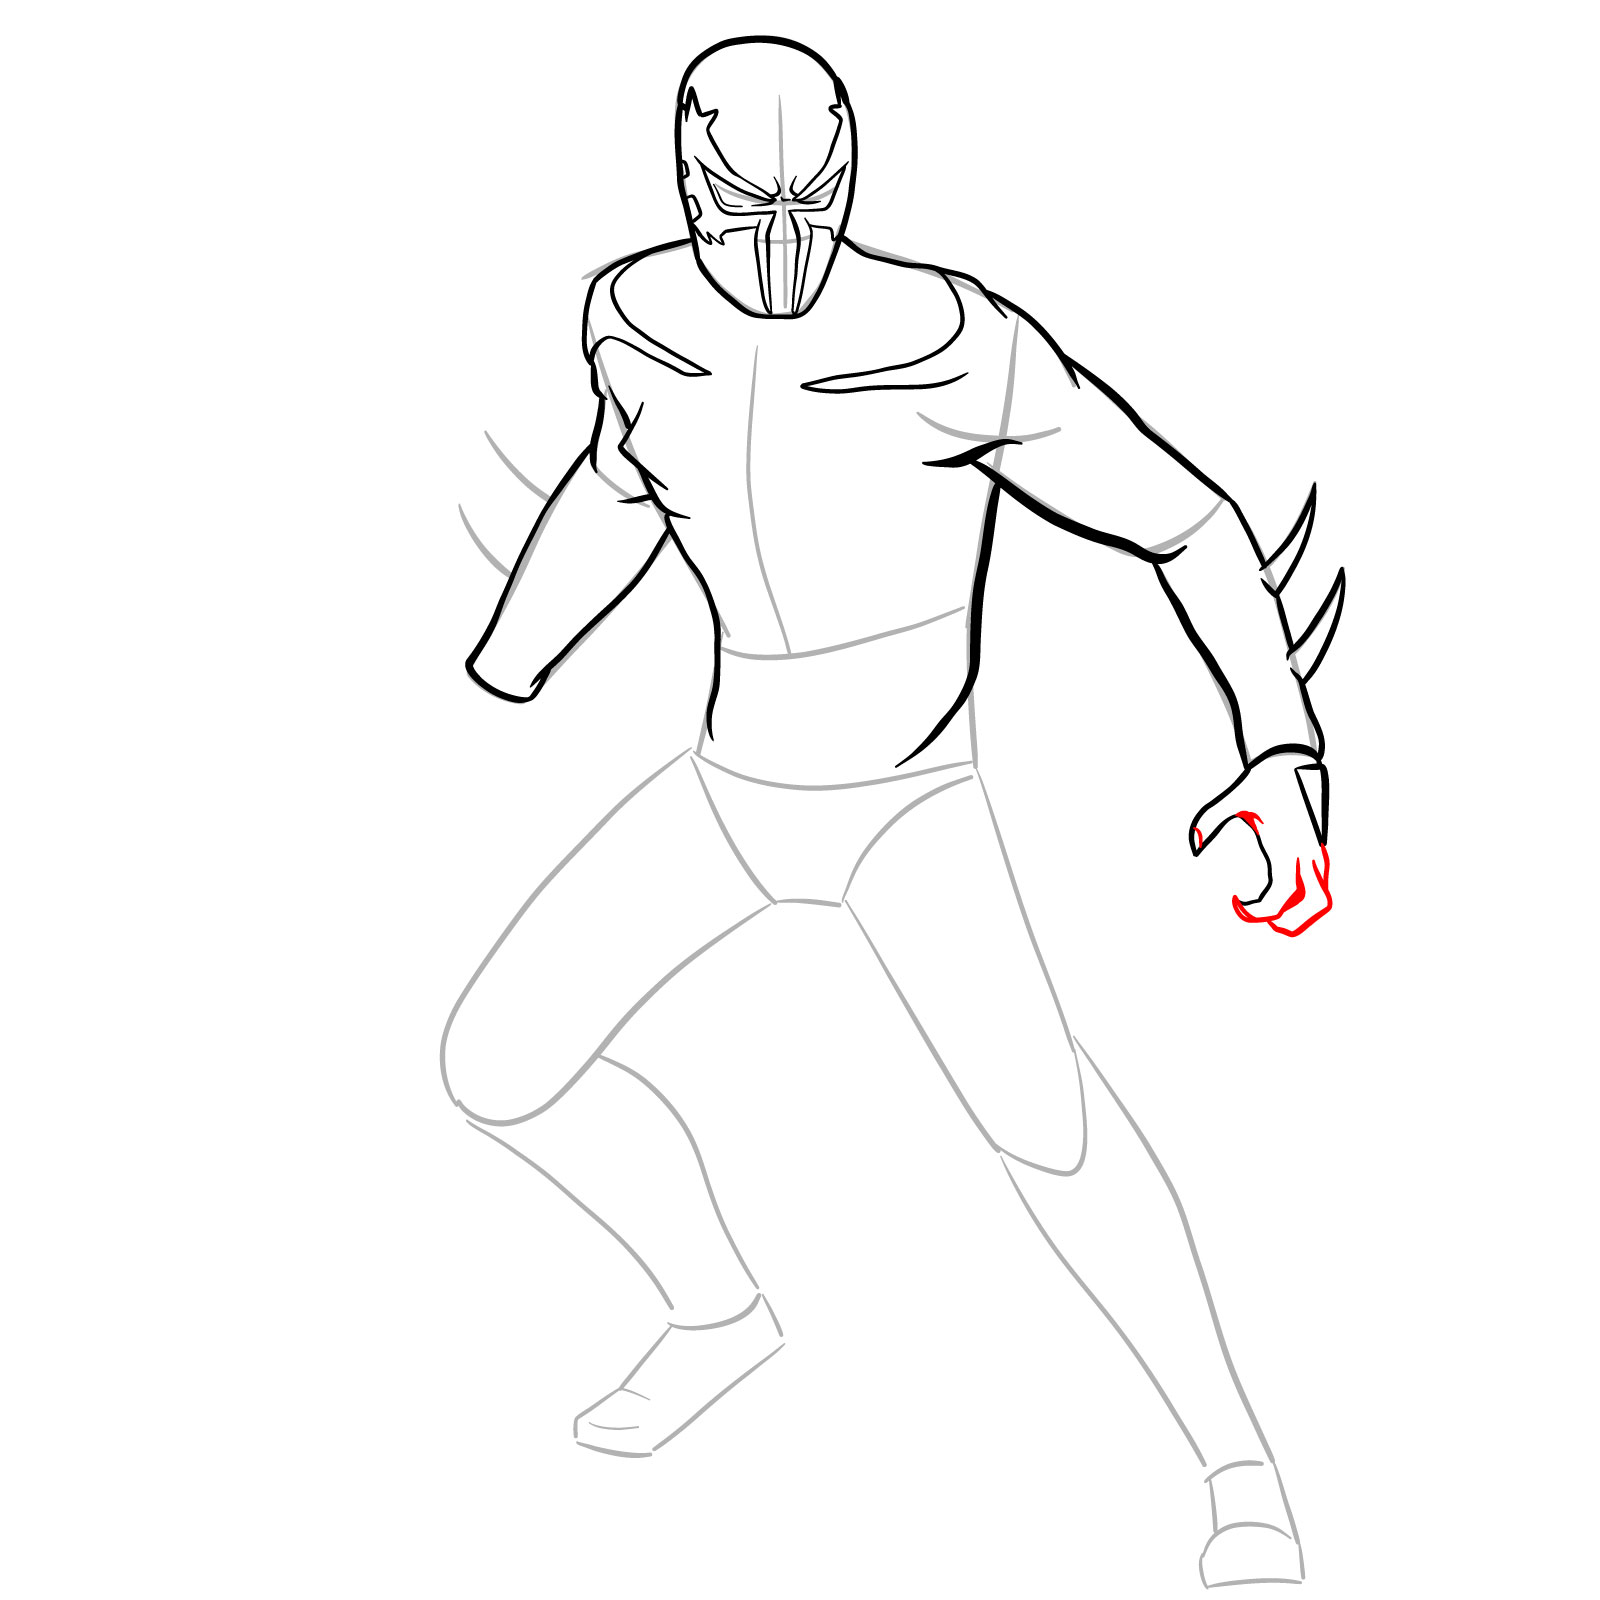 How to draw Spider-Man 2099 - step 19